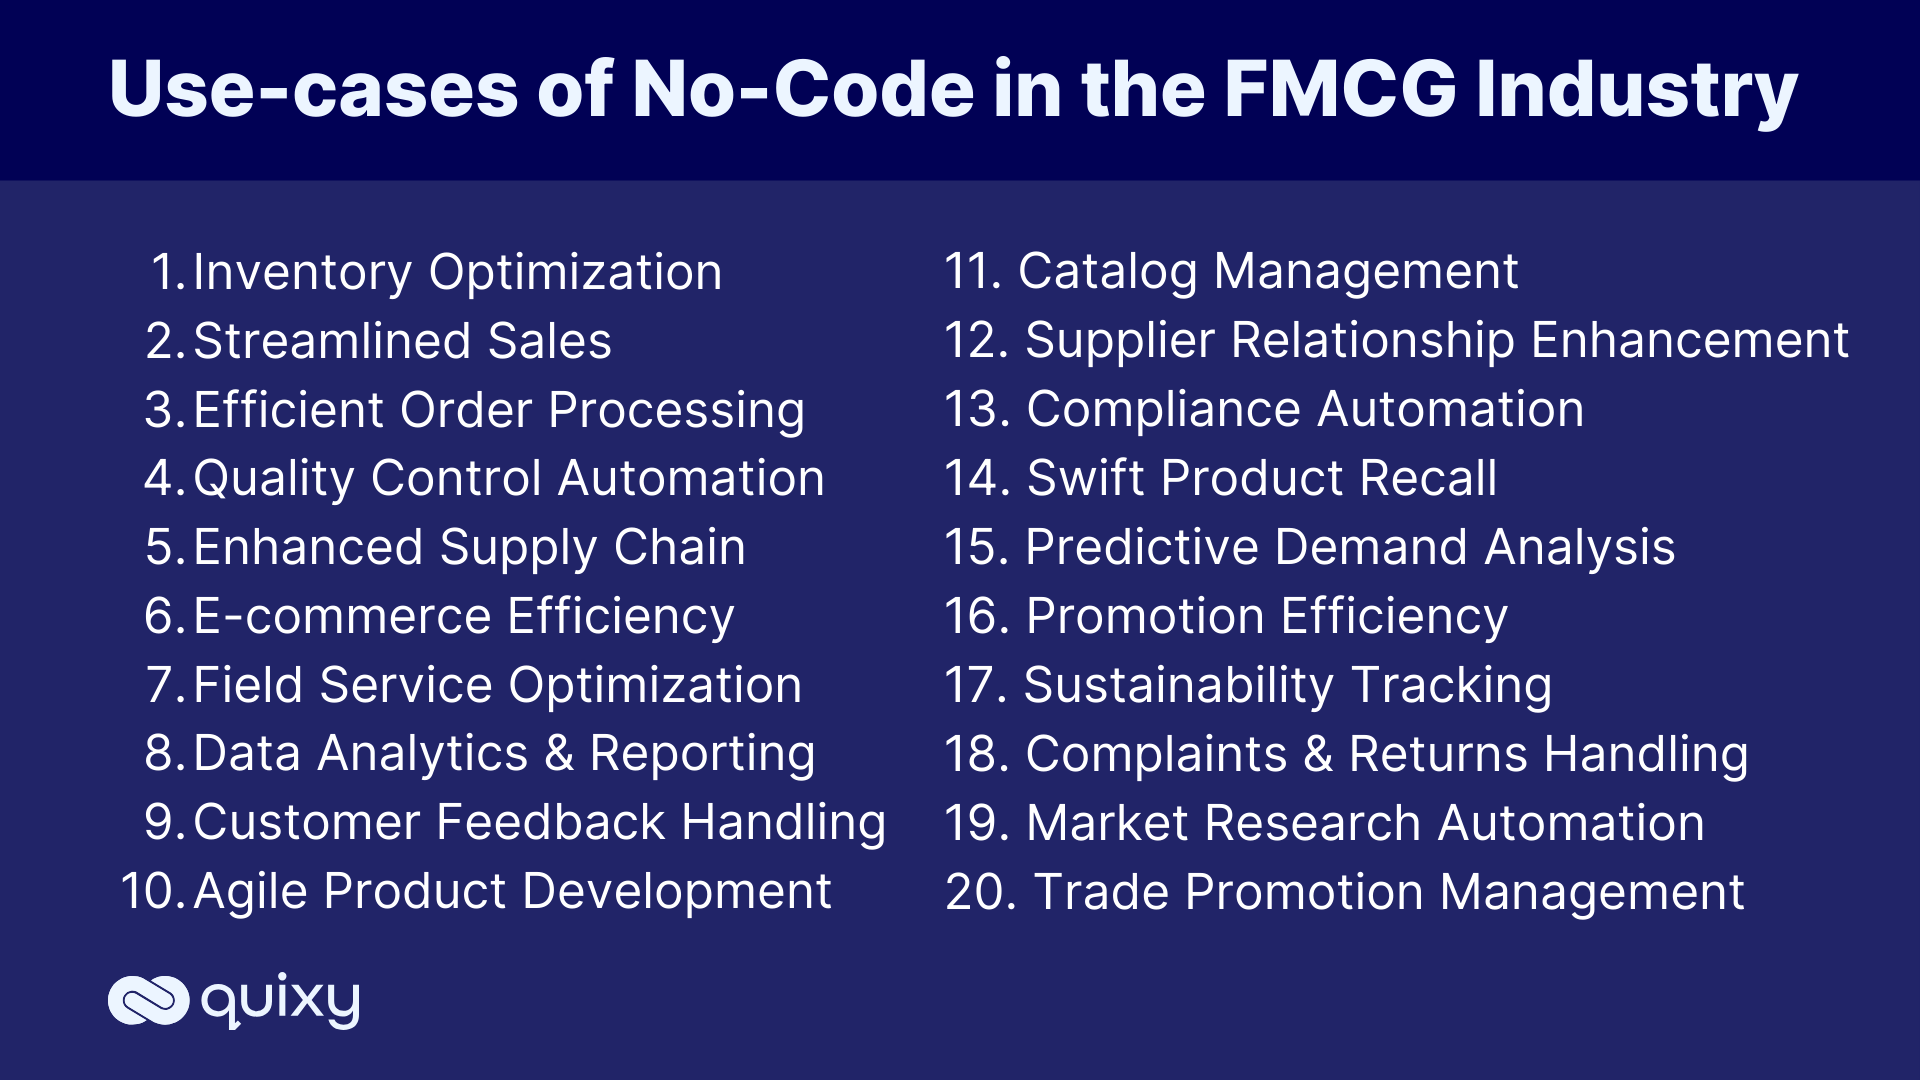 Use Cases of No-Code in the FMCG Industry